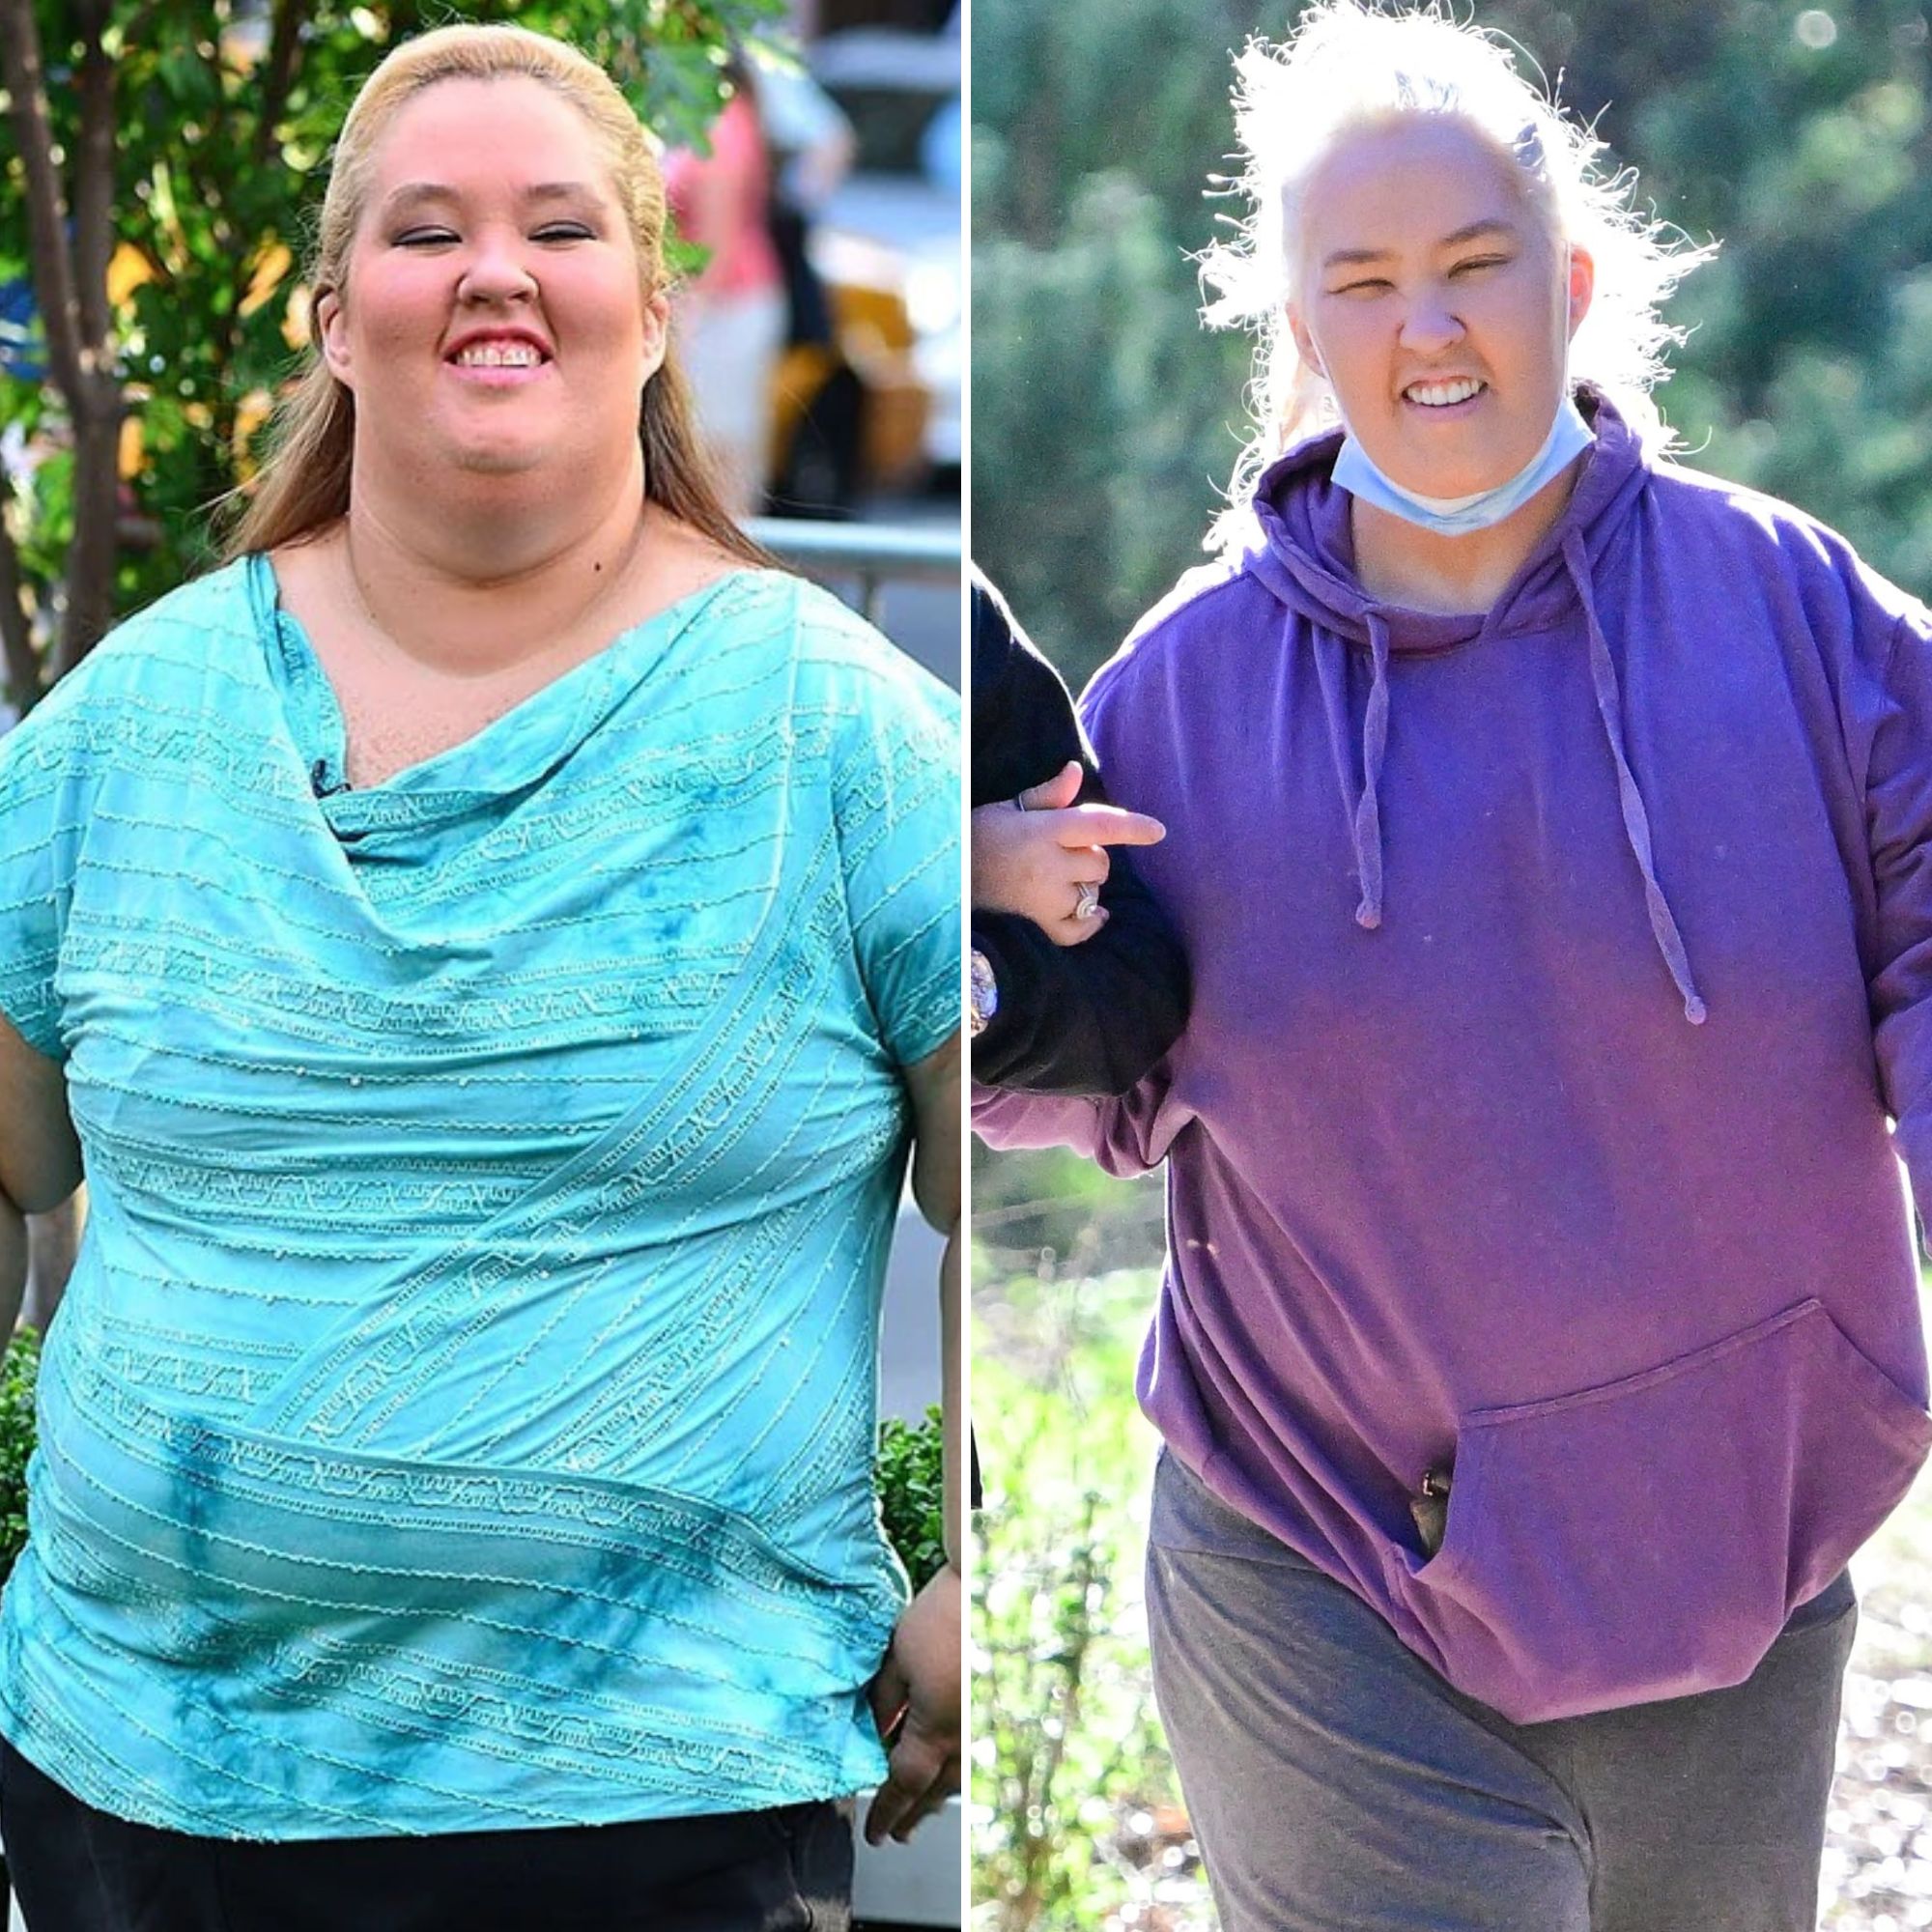 https://www.lifeandstylemag.com/wp-content/uploads/2021/03/Mama-Junes-From-Not-to-Hot-Weight-Loss-Transformation-See-Her-Fitness-Progress.jpg?fit=2000%2C2000&quality=86&strip=all